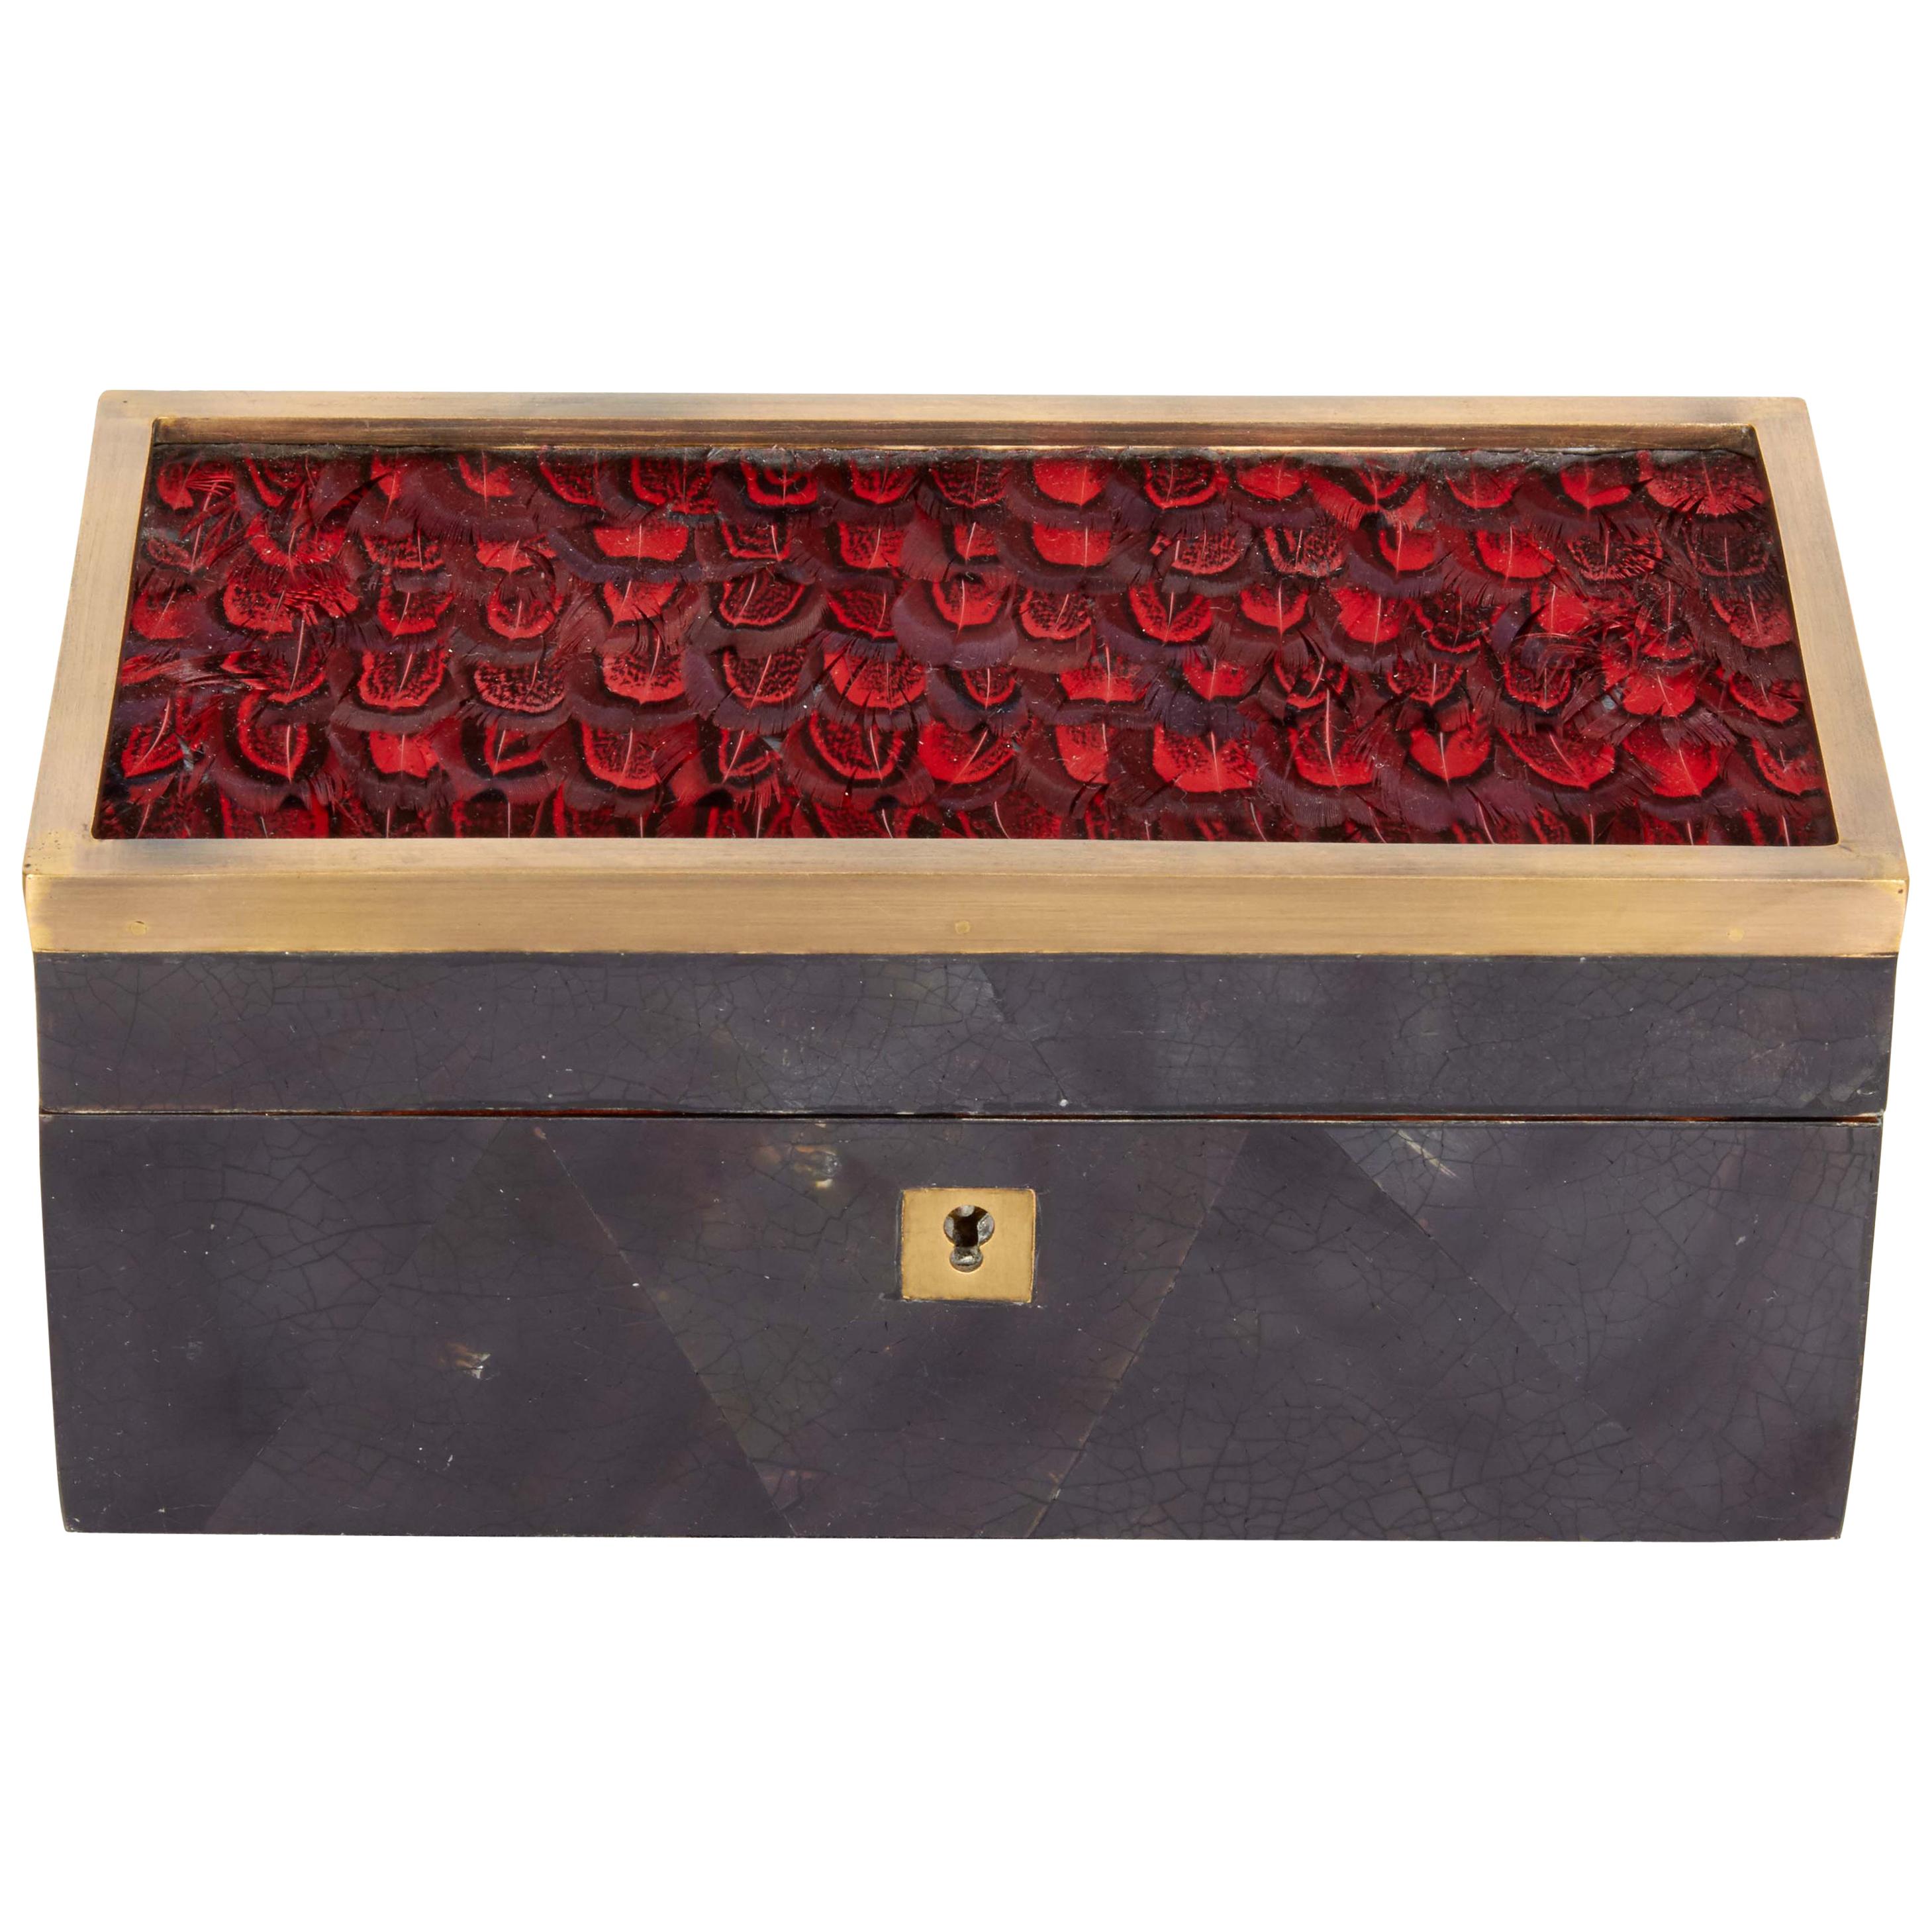 Organic Modern Decorative Box in Lacquered Pen Shell and Exotic Red Feathers